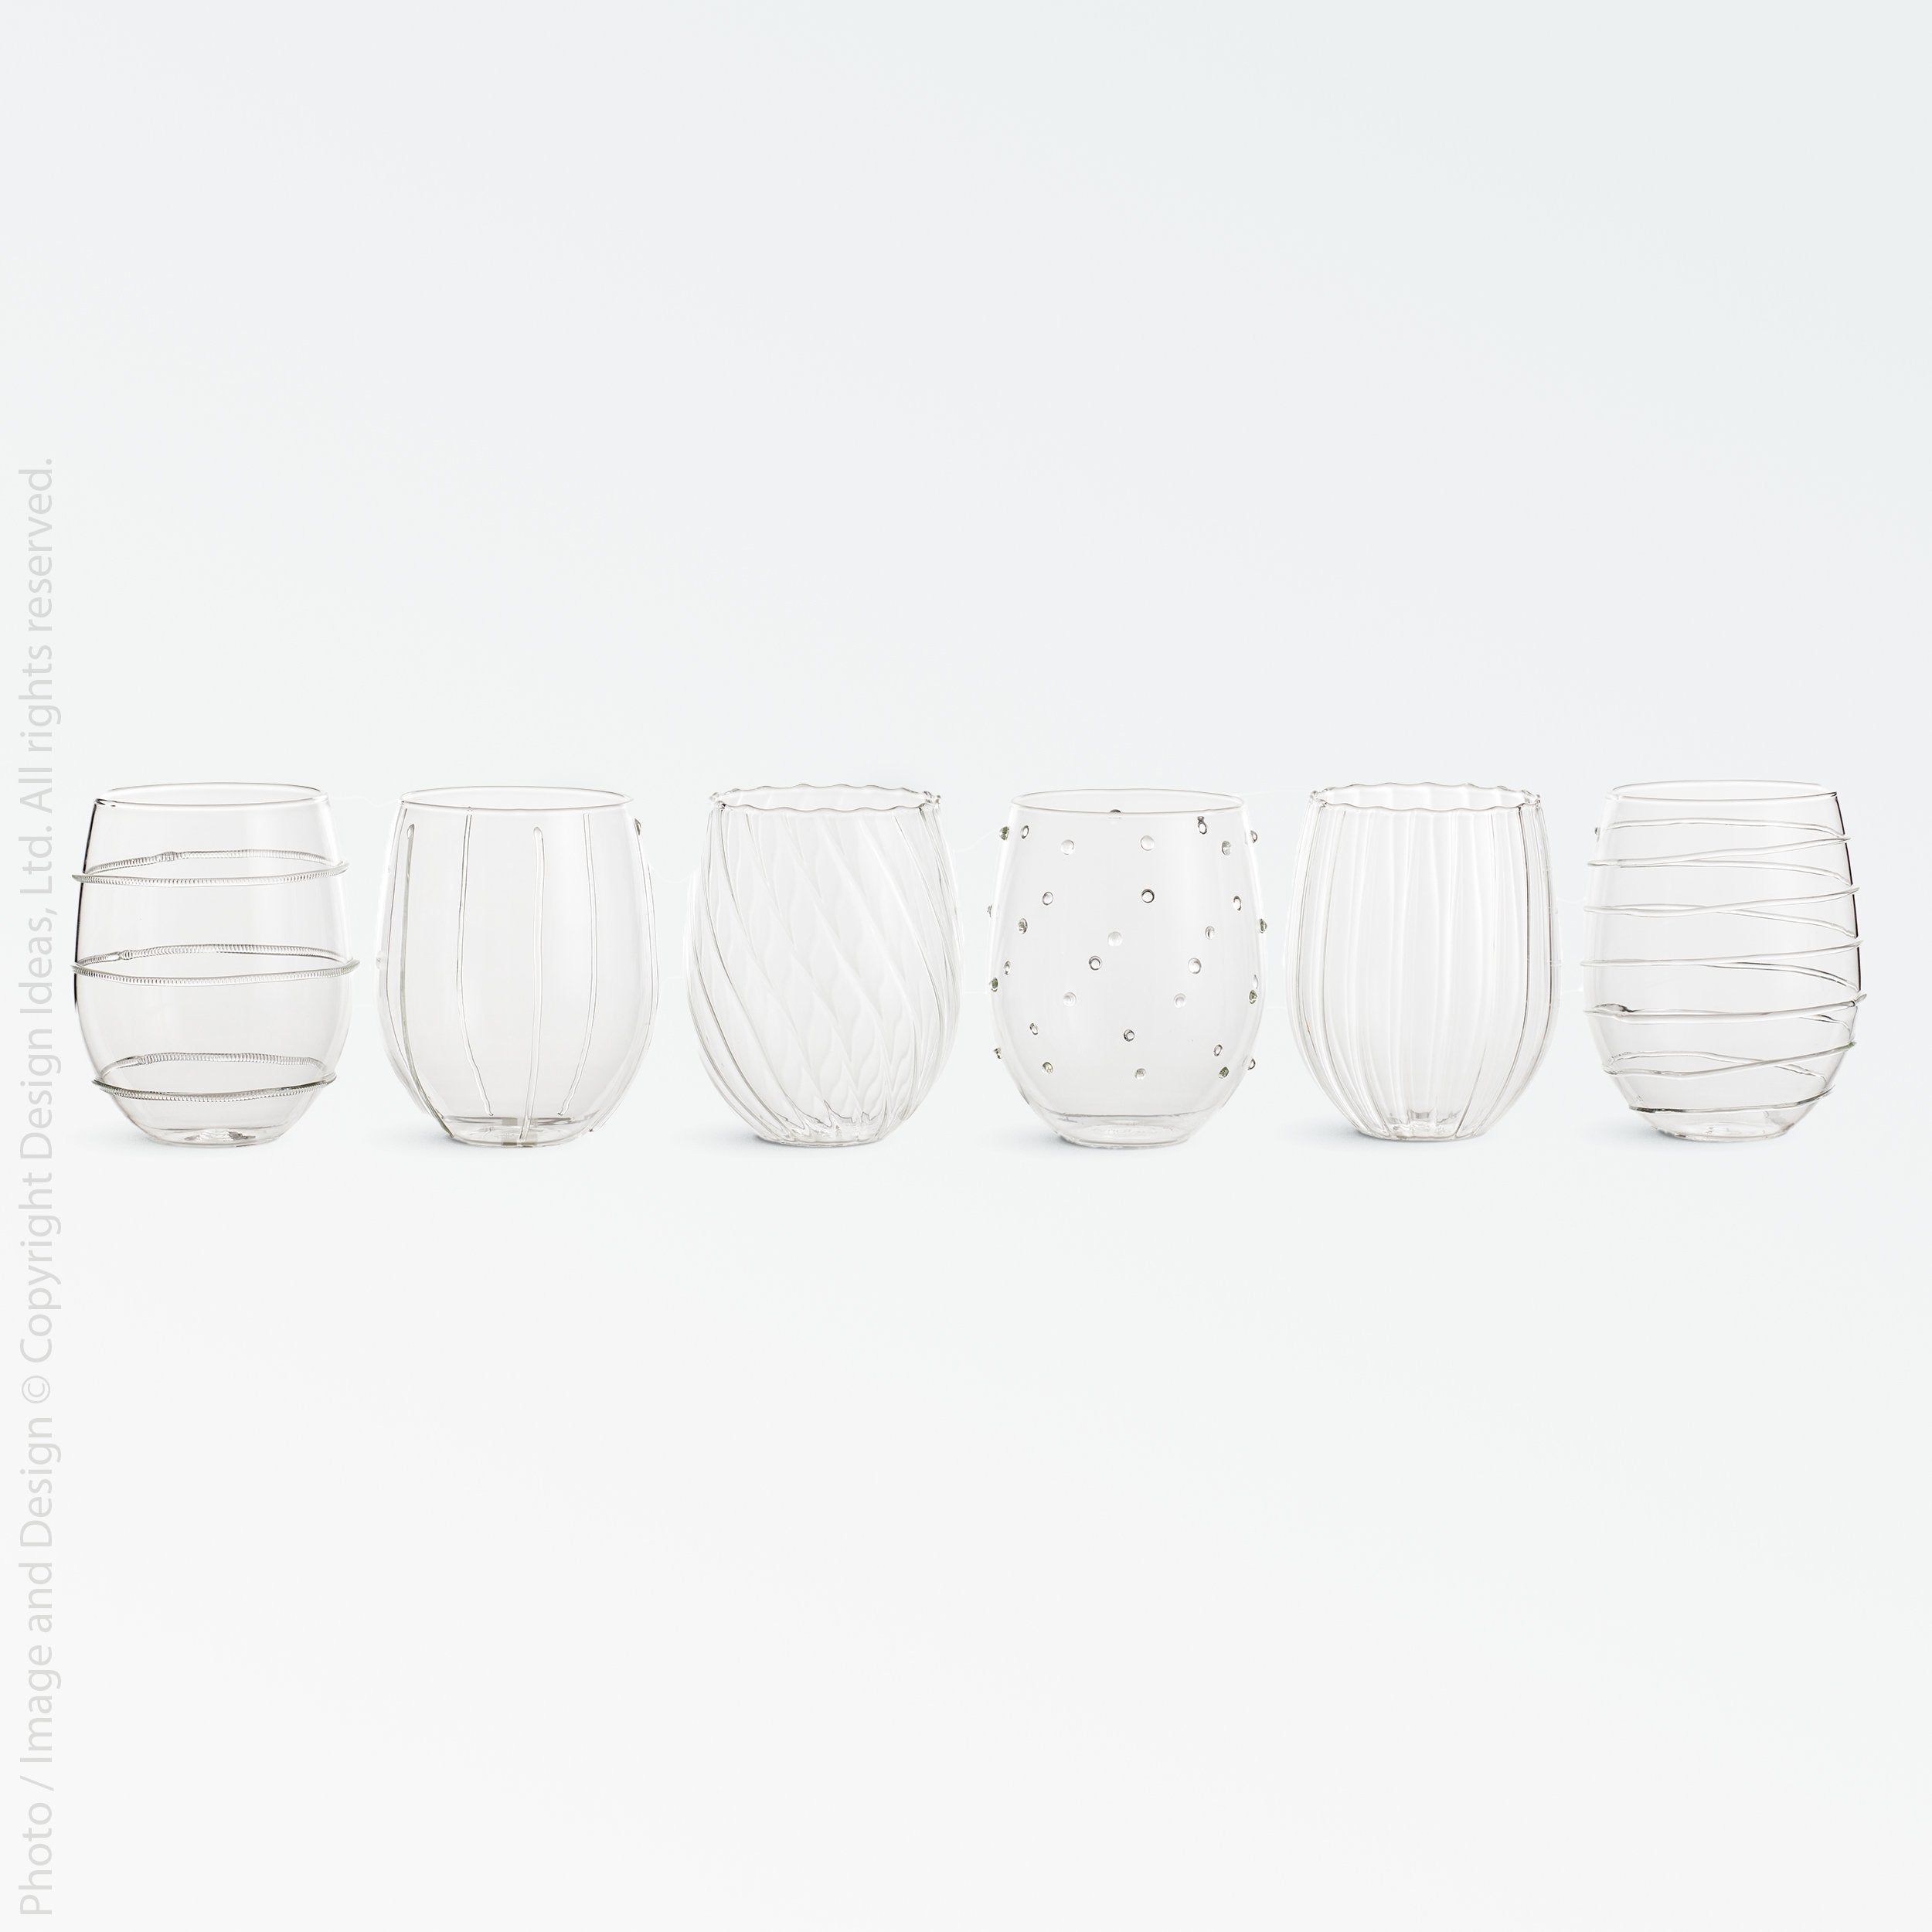 Livenza™ stemless wine glass (set of 6) - Clear | Image 1 | Premium Glass from the Livenza collection | made with Borosilicate Glass for long lasting use | texxture